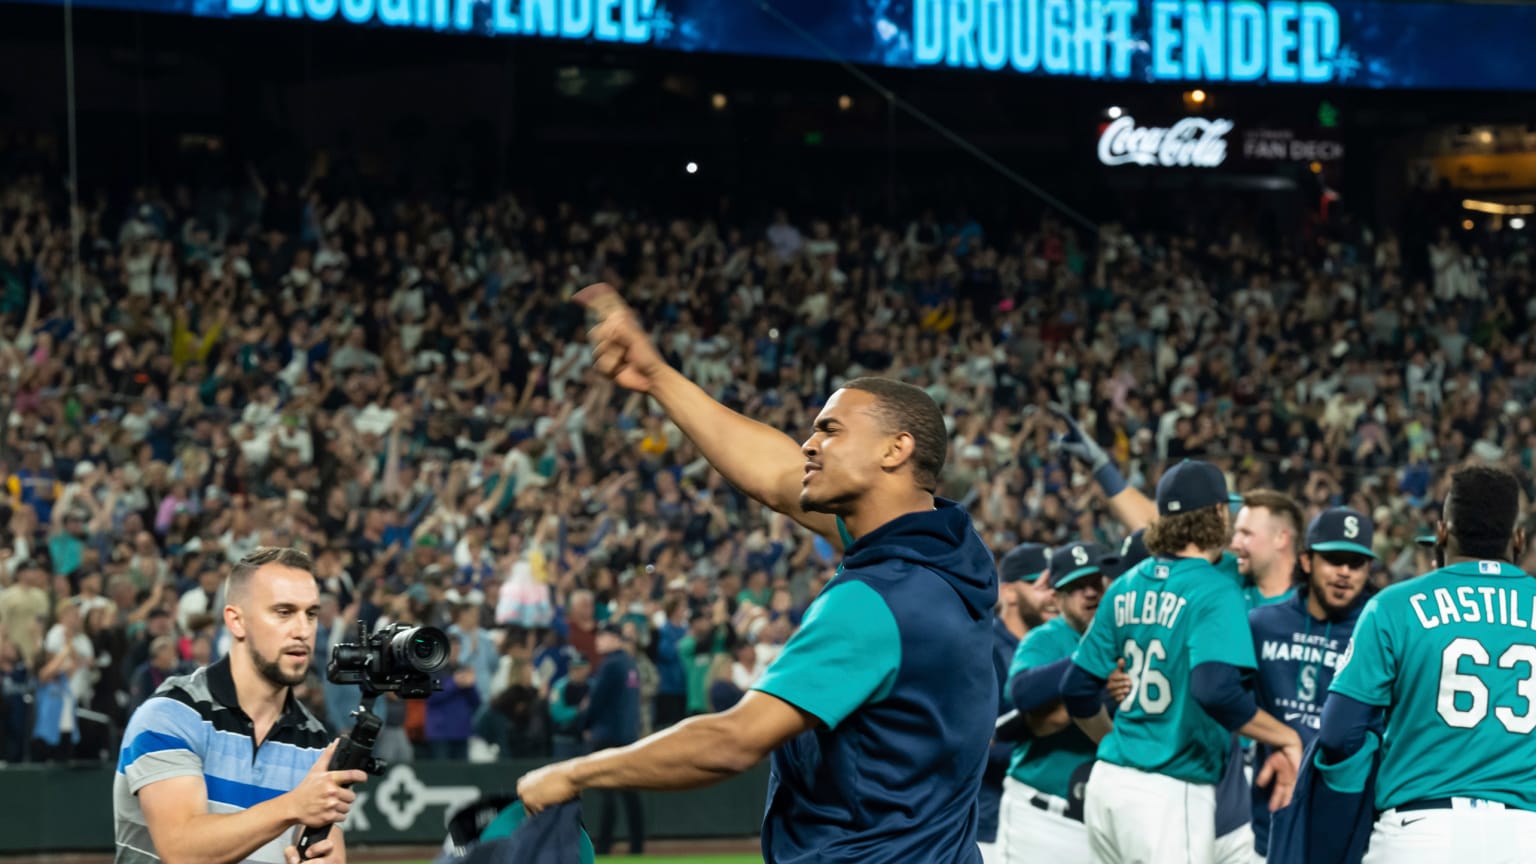 Mariners outfielder Julio Rodriguez celebrates in a sweatshirt, pointing to the fans, while a man in a polo shirt films him. Mariners players congratulate each other behind Rodriguez and to his right, all in front of a background of jubilant fans